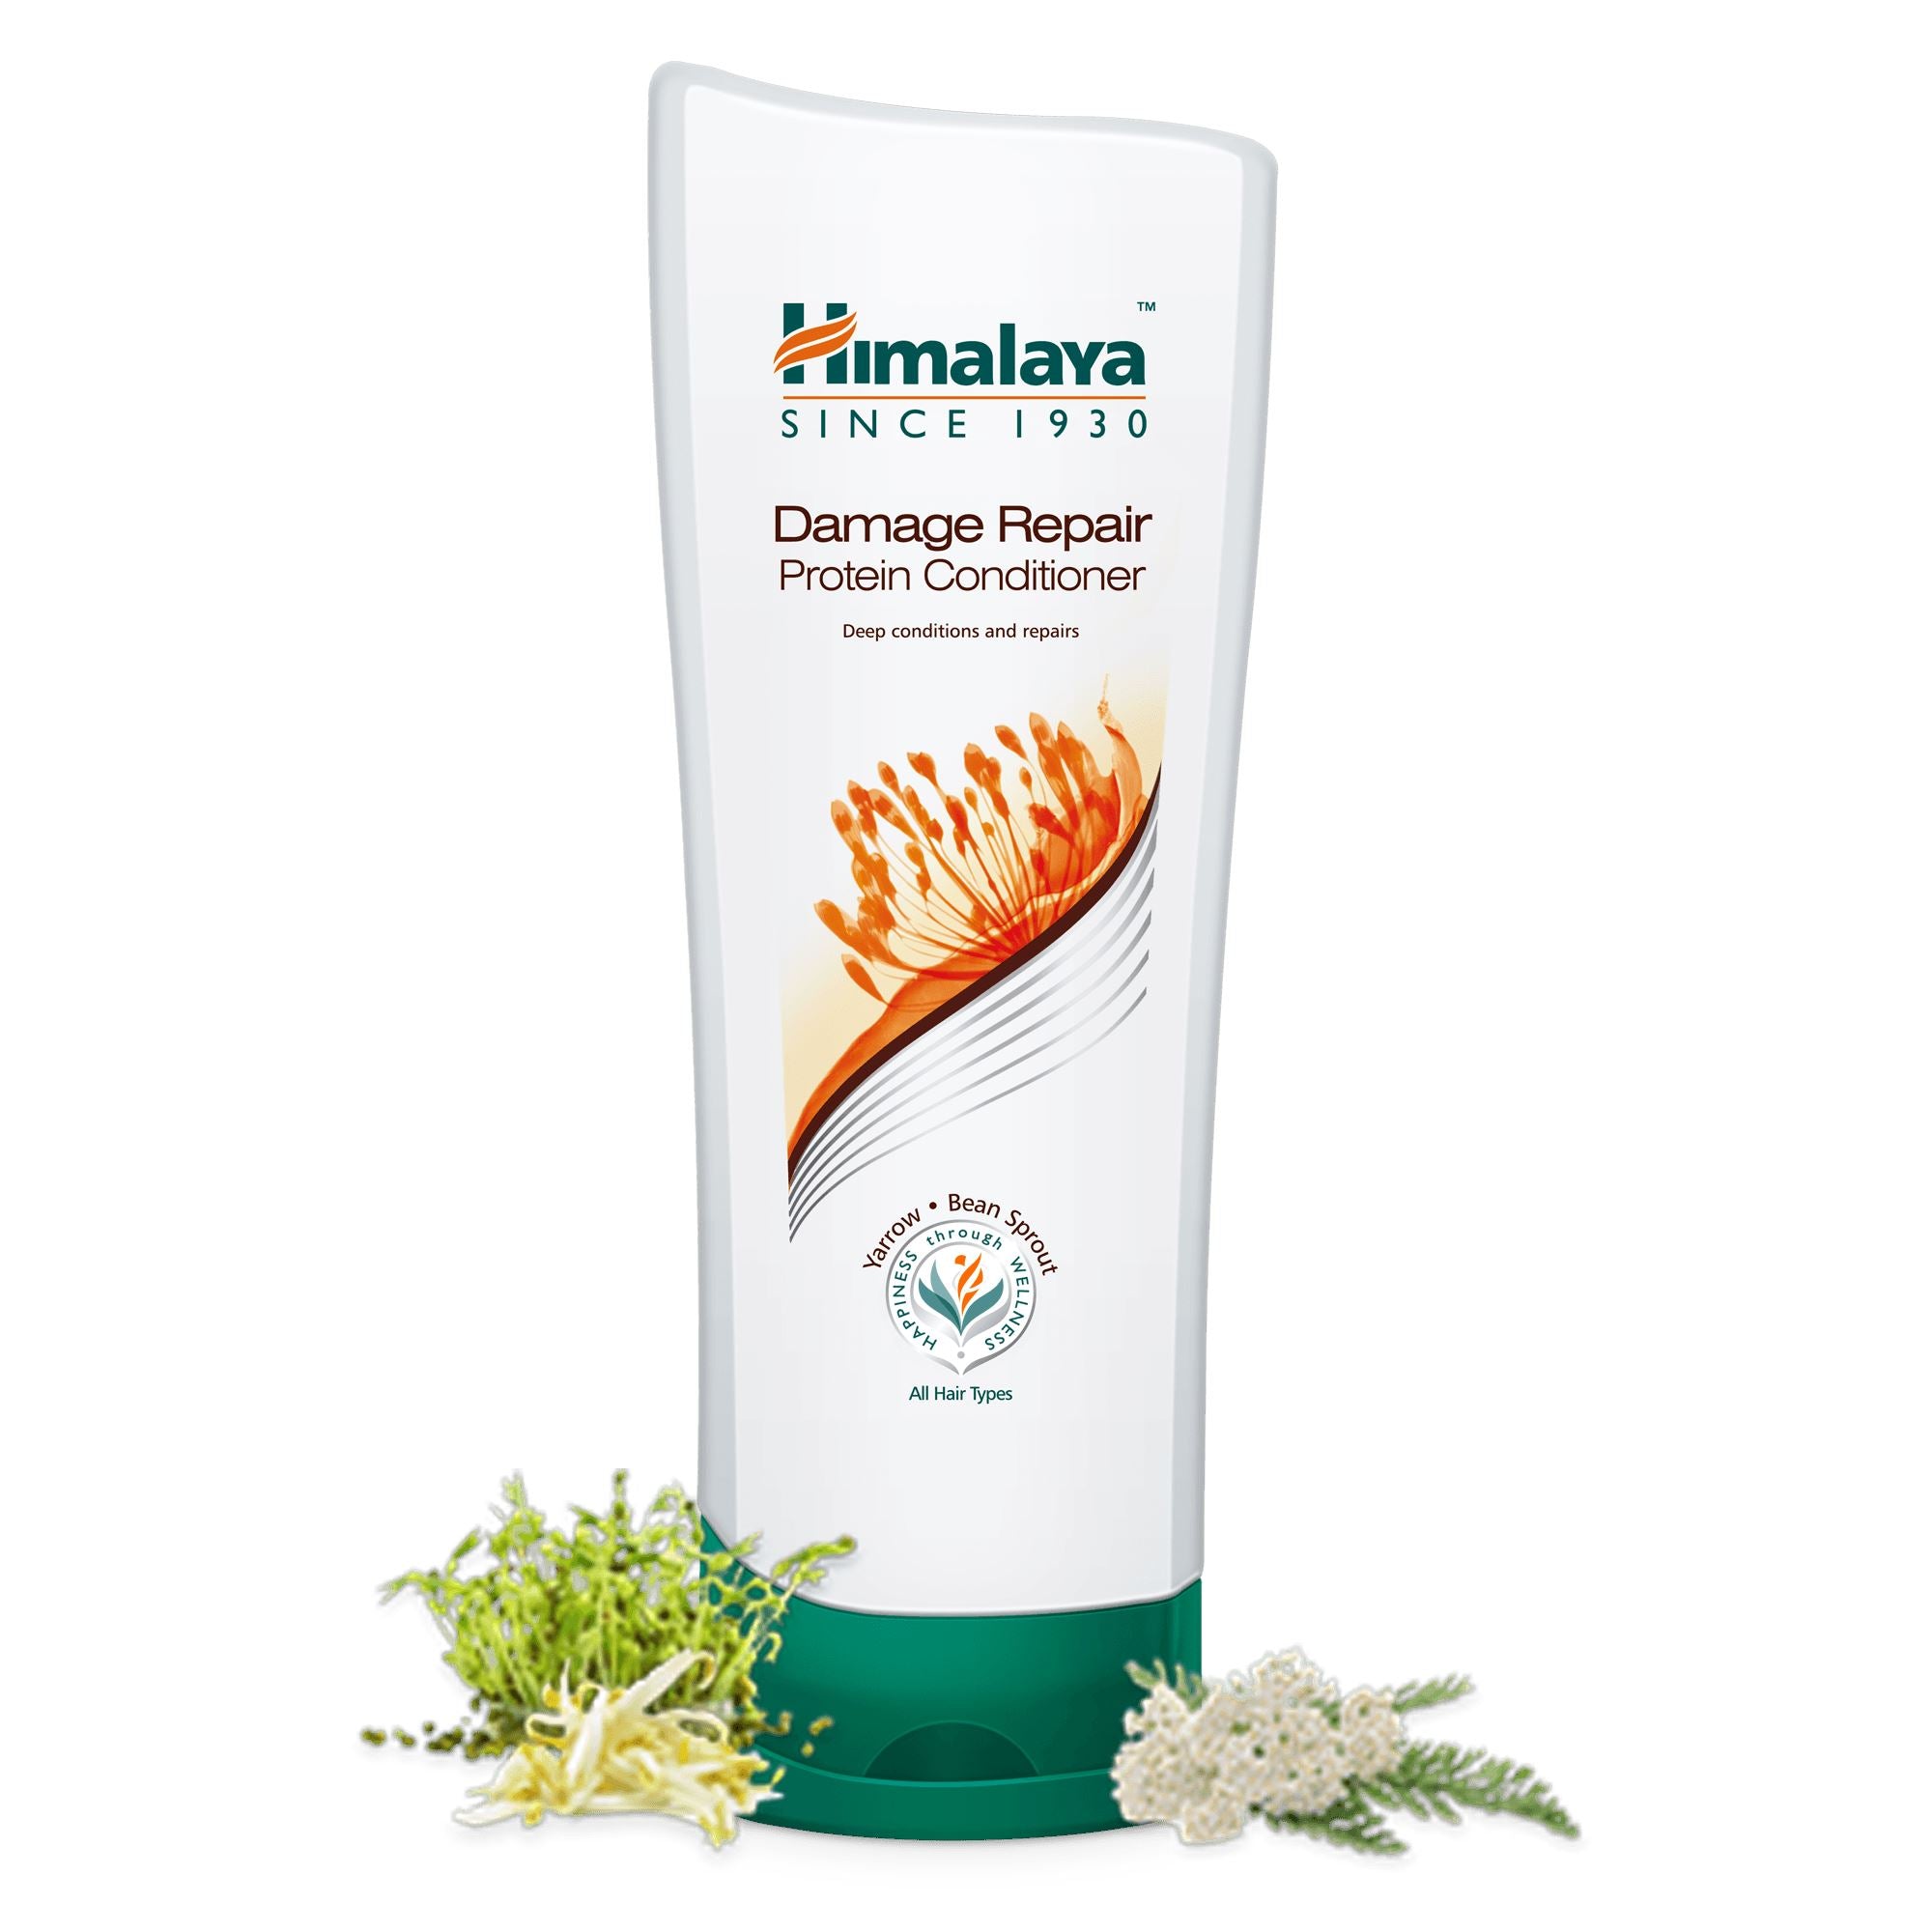 Himalaya Damage Repair Protein Conditioner 200ml - Provides conditioning for dry, frizzy or damaged hair